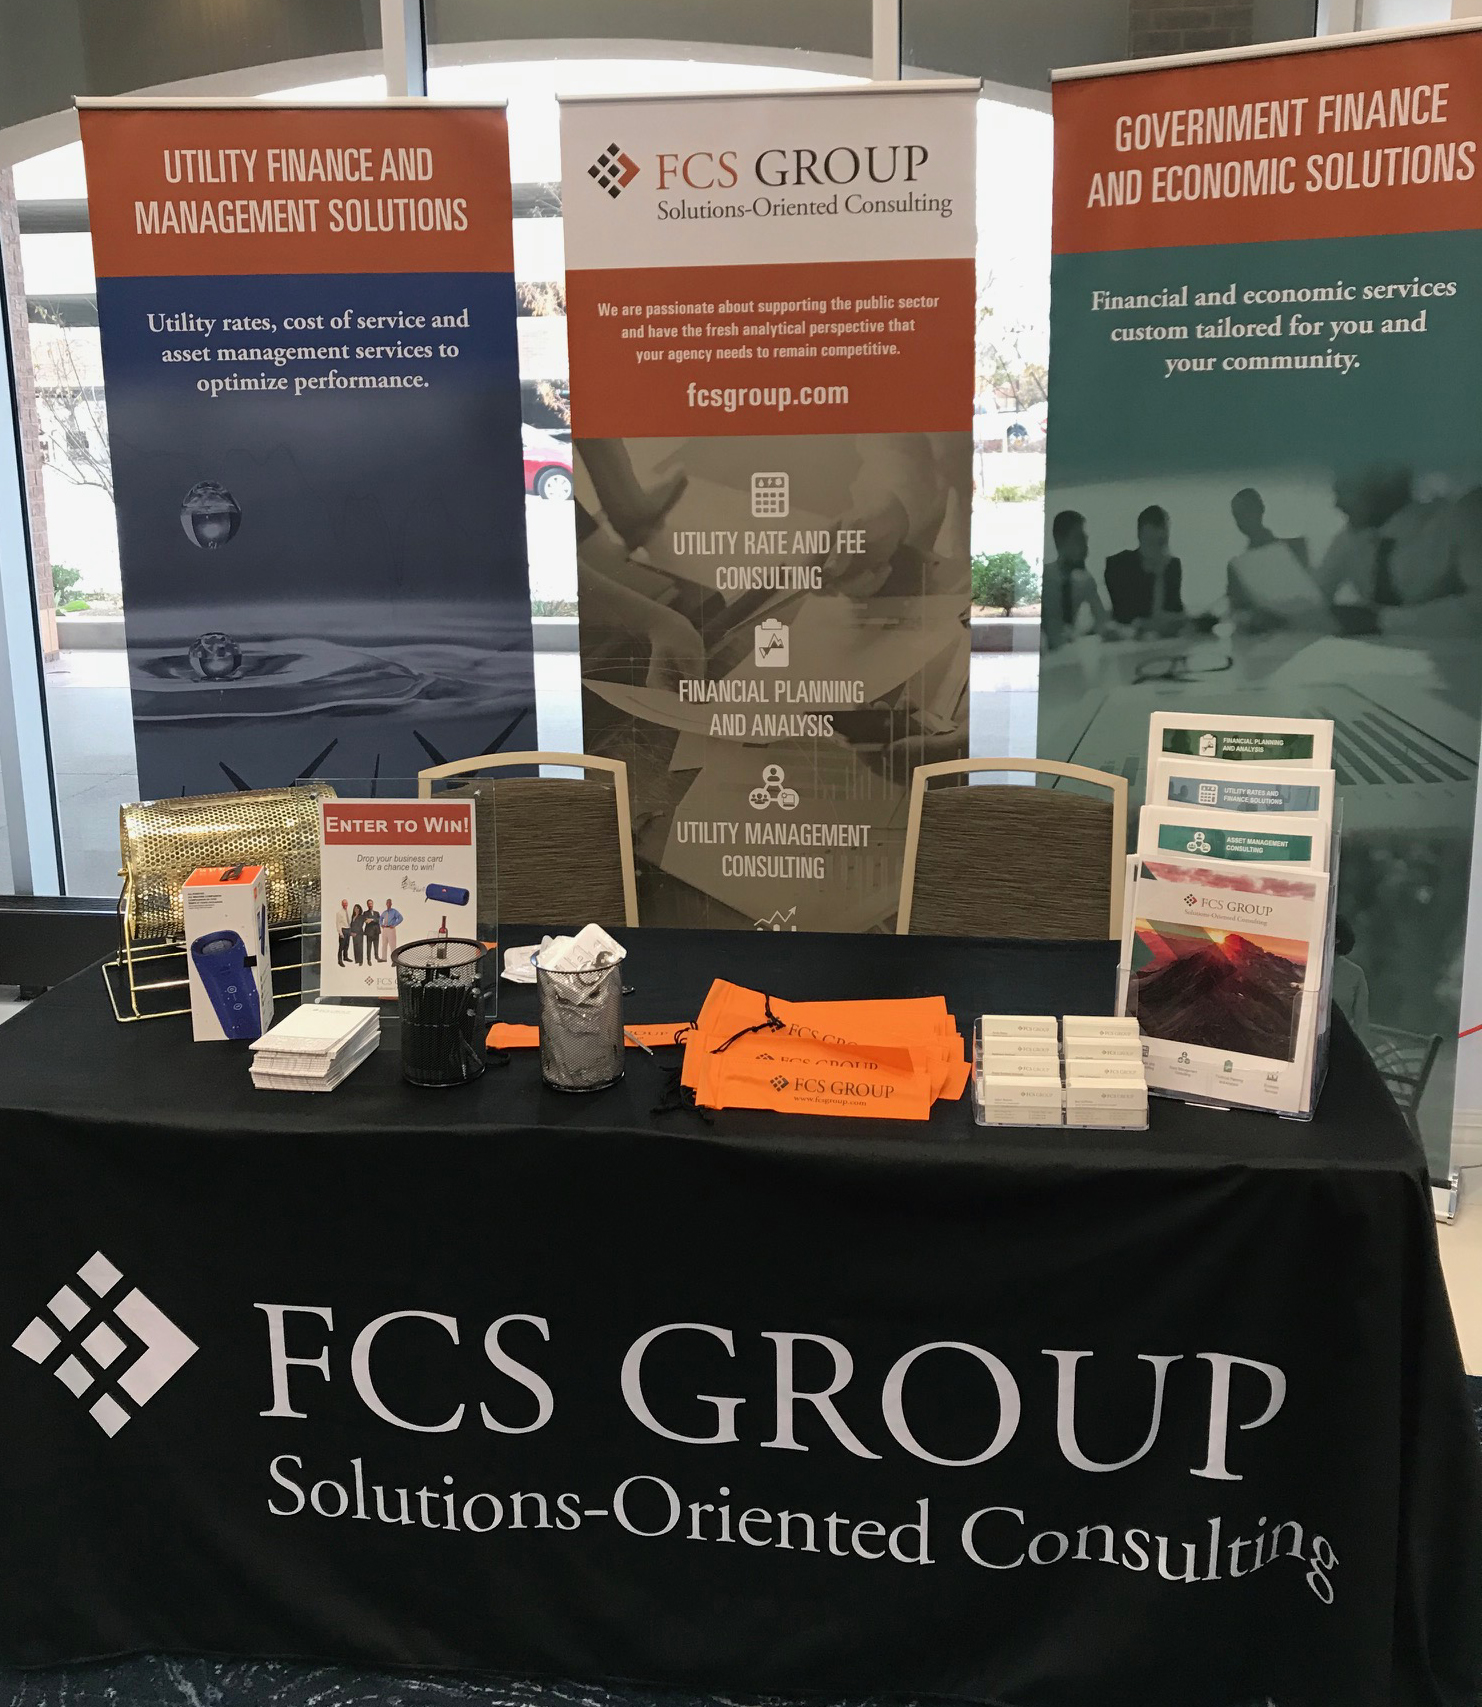 FCS booth at event